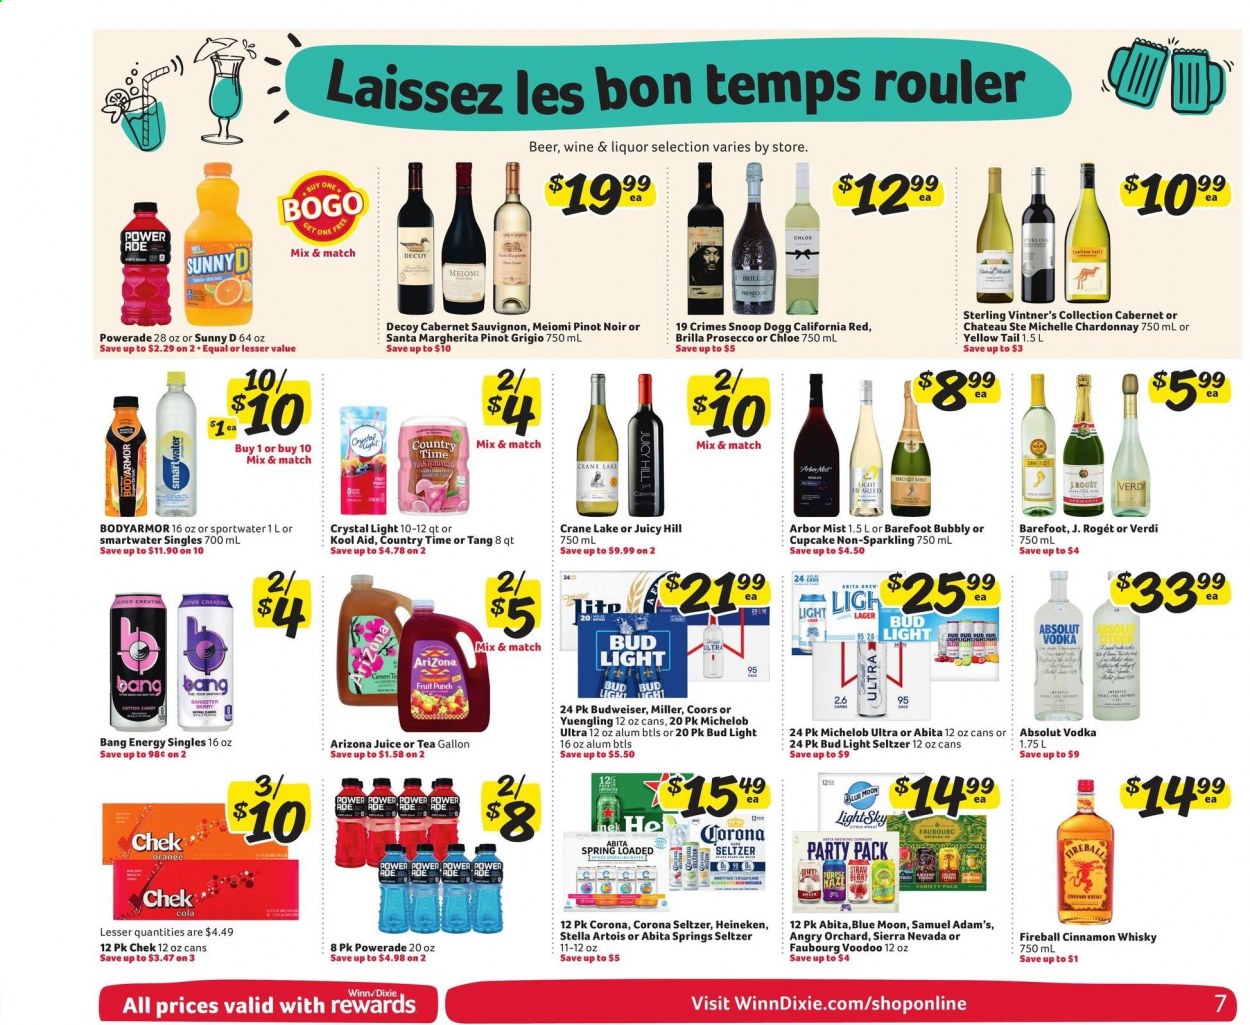 thumbnail - Winn Dixie Flyer - 08/25/2021 - 08/31/2021 - Sales products - oranges, cotton candy, Santa, Powerade, juice, AriZona, Country Time, fruit punch, Smartwater, tea, Cabernet Sauvignon, red wine, white wine, prosecco, Chardonnay, wine, Pinot Noir, Pinot Grigio, vodka, liquor, Absolut, Hard Seltzer, cinnamon whisky, whisky, beer, Bud Light, Corona Extra, Heineken, Miller, Lager, Chloé, Budweiser, Stella Artois, Coors, Blue Moon, Yuengling, Michelob. Page 7.